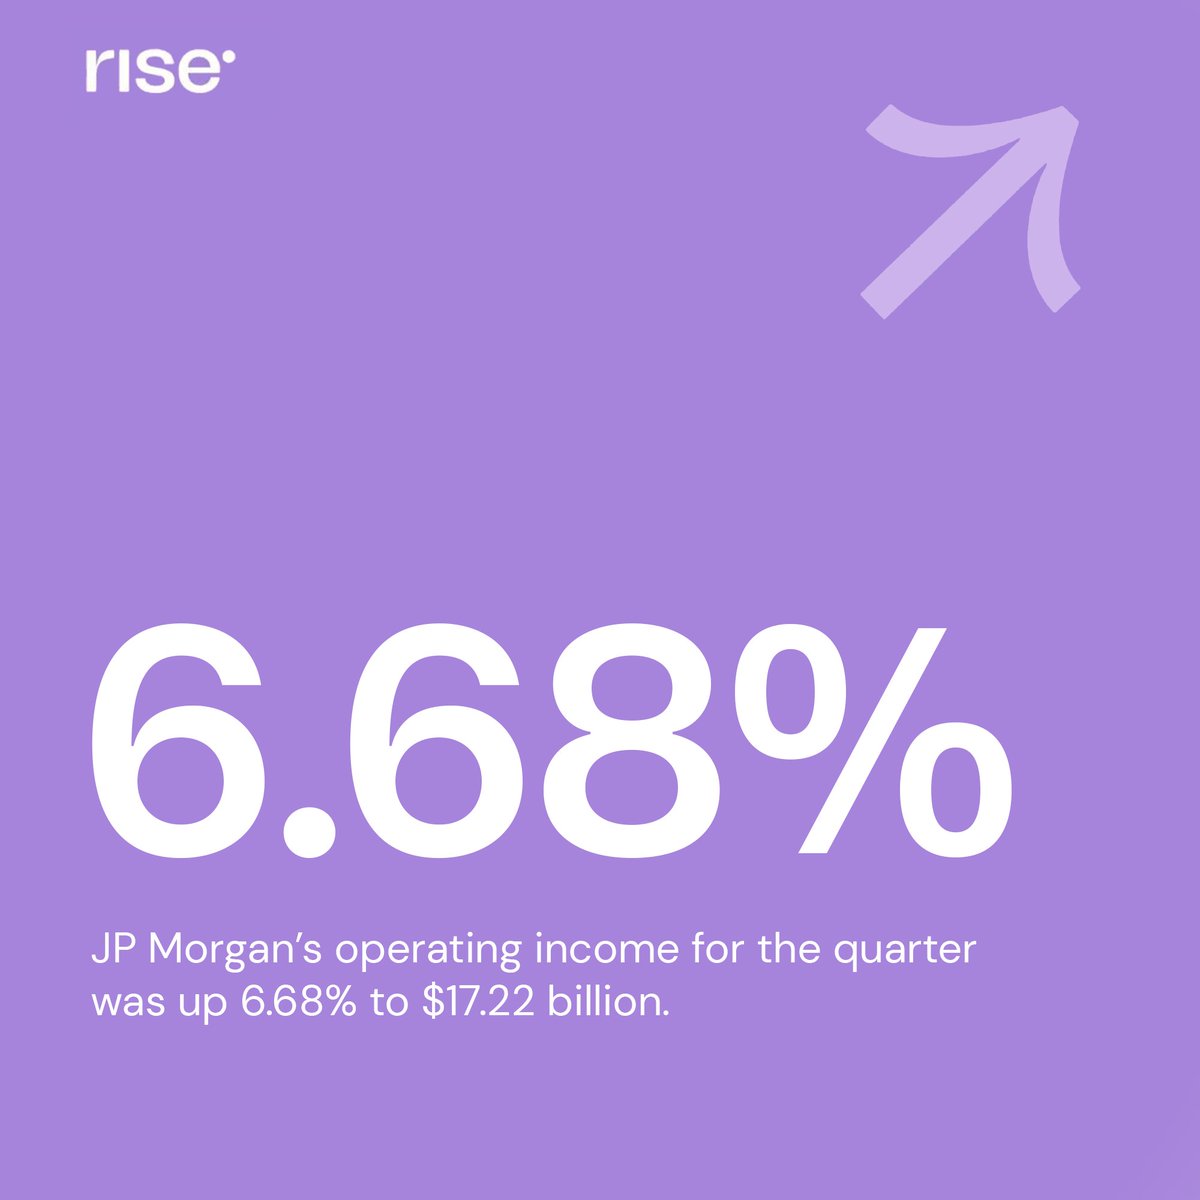 Here's a summary of our portfolio company, JP Morgan's Q1 earnings report. Create a stocks plan on Rise now. click.risevest.com/gb0g/tw